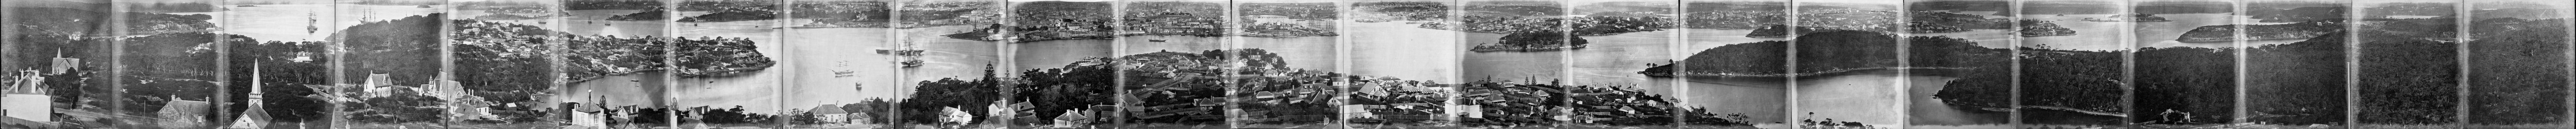 Panorama of Sydney from Lavender Bay (1875) photo